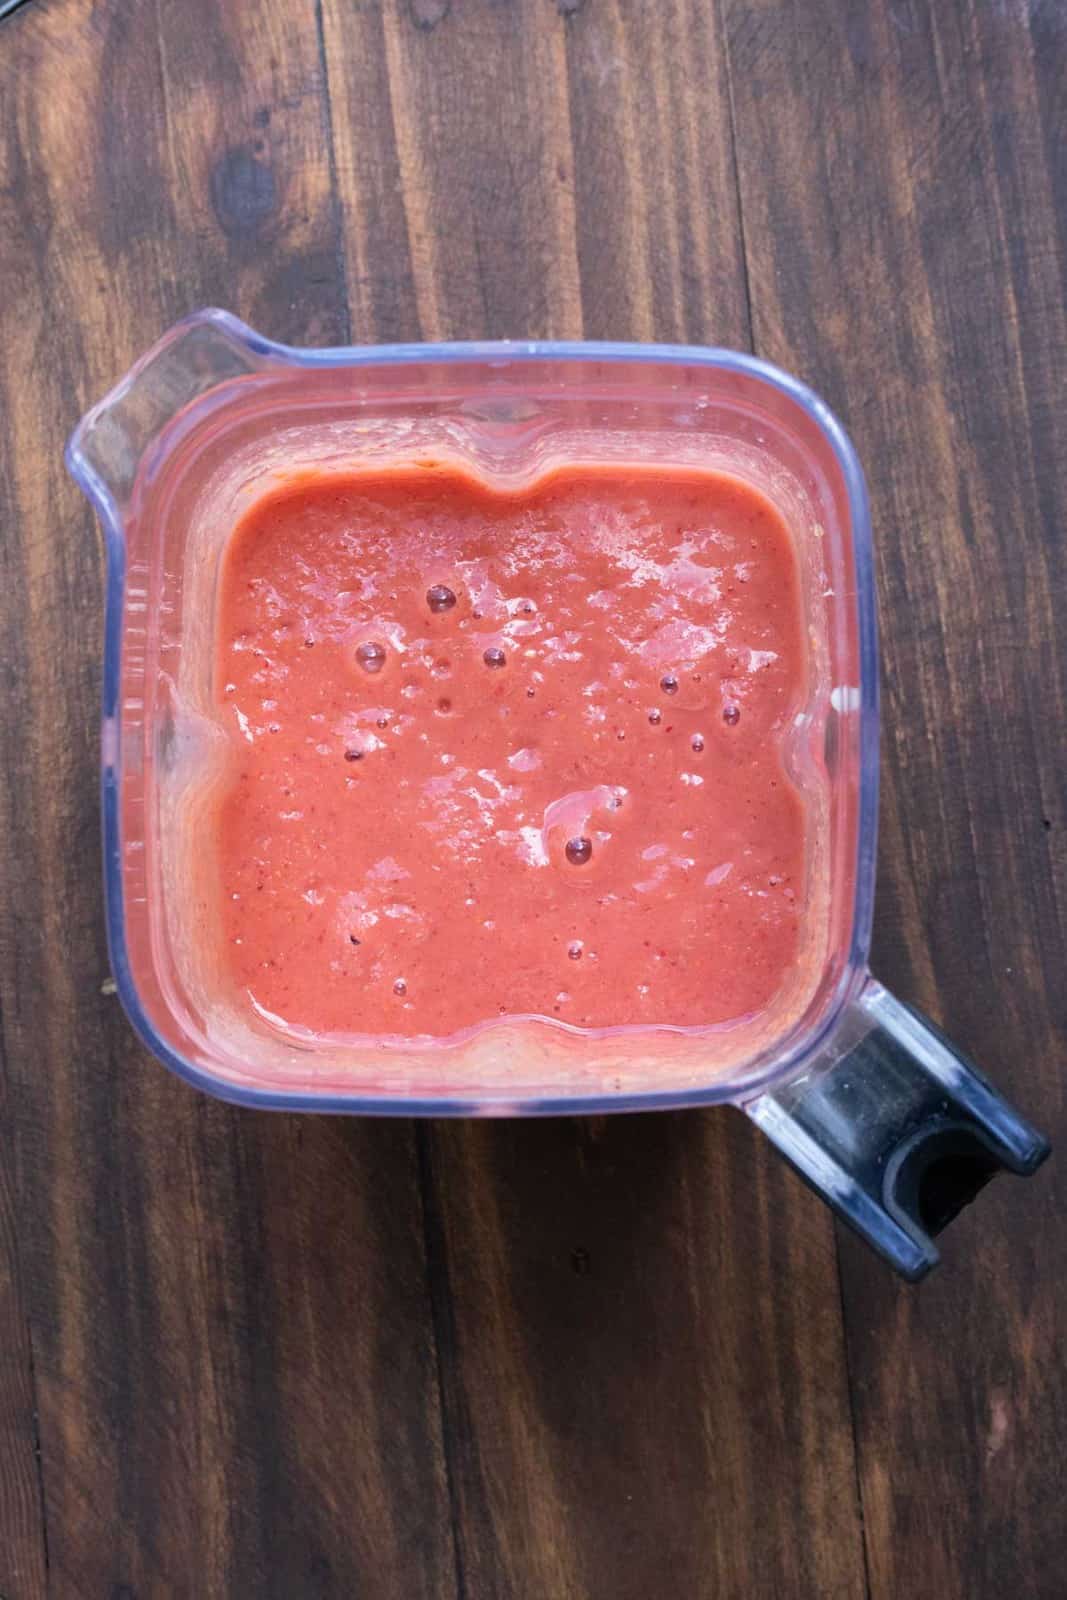 Top view of a pink smoothie in a blender